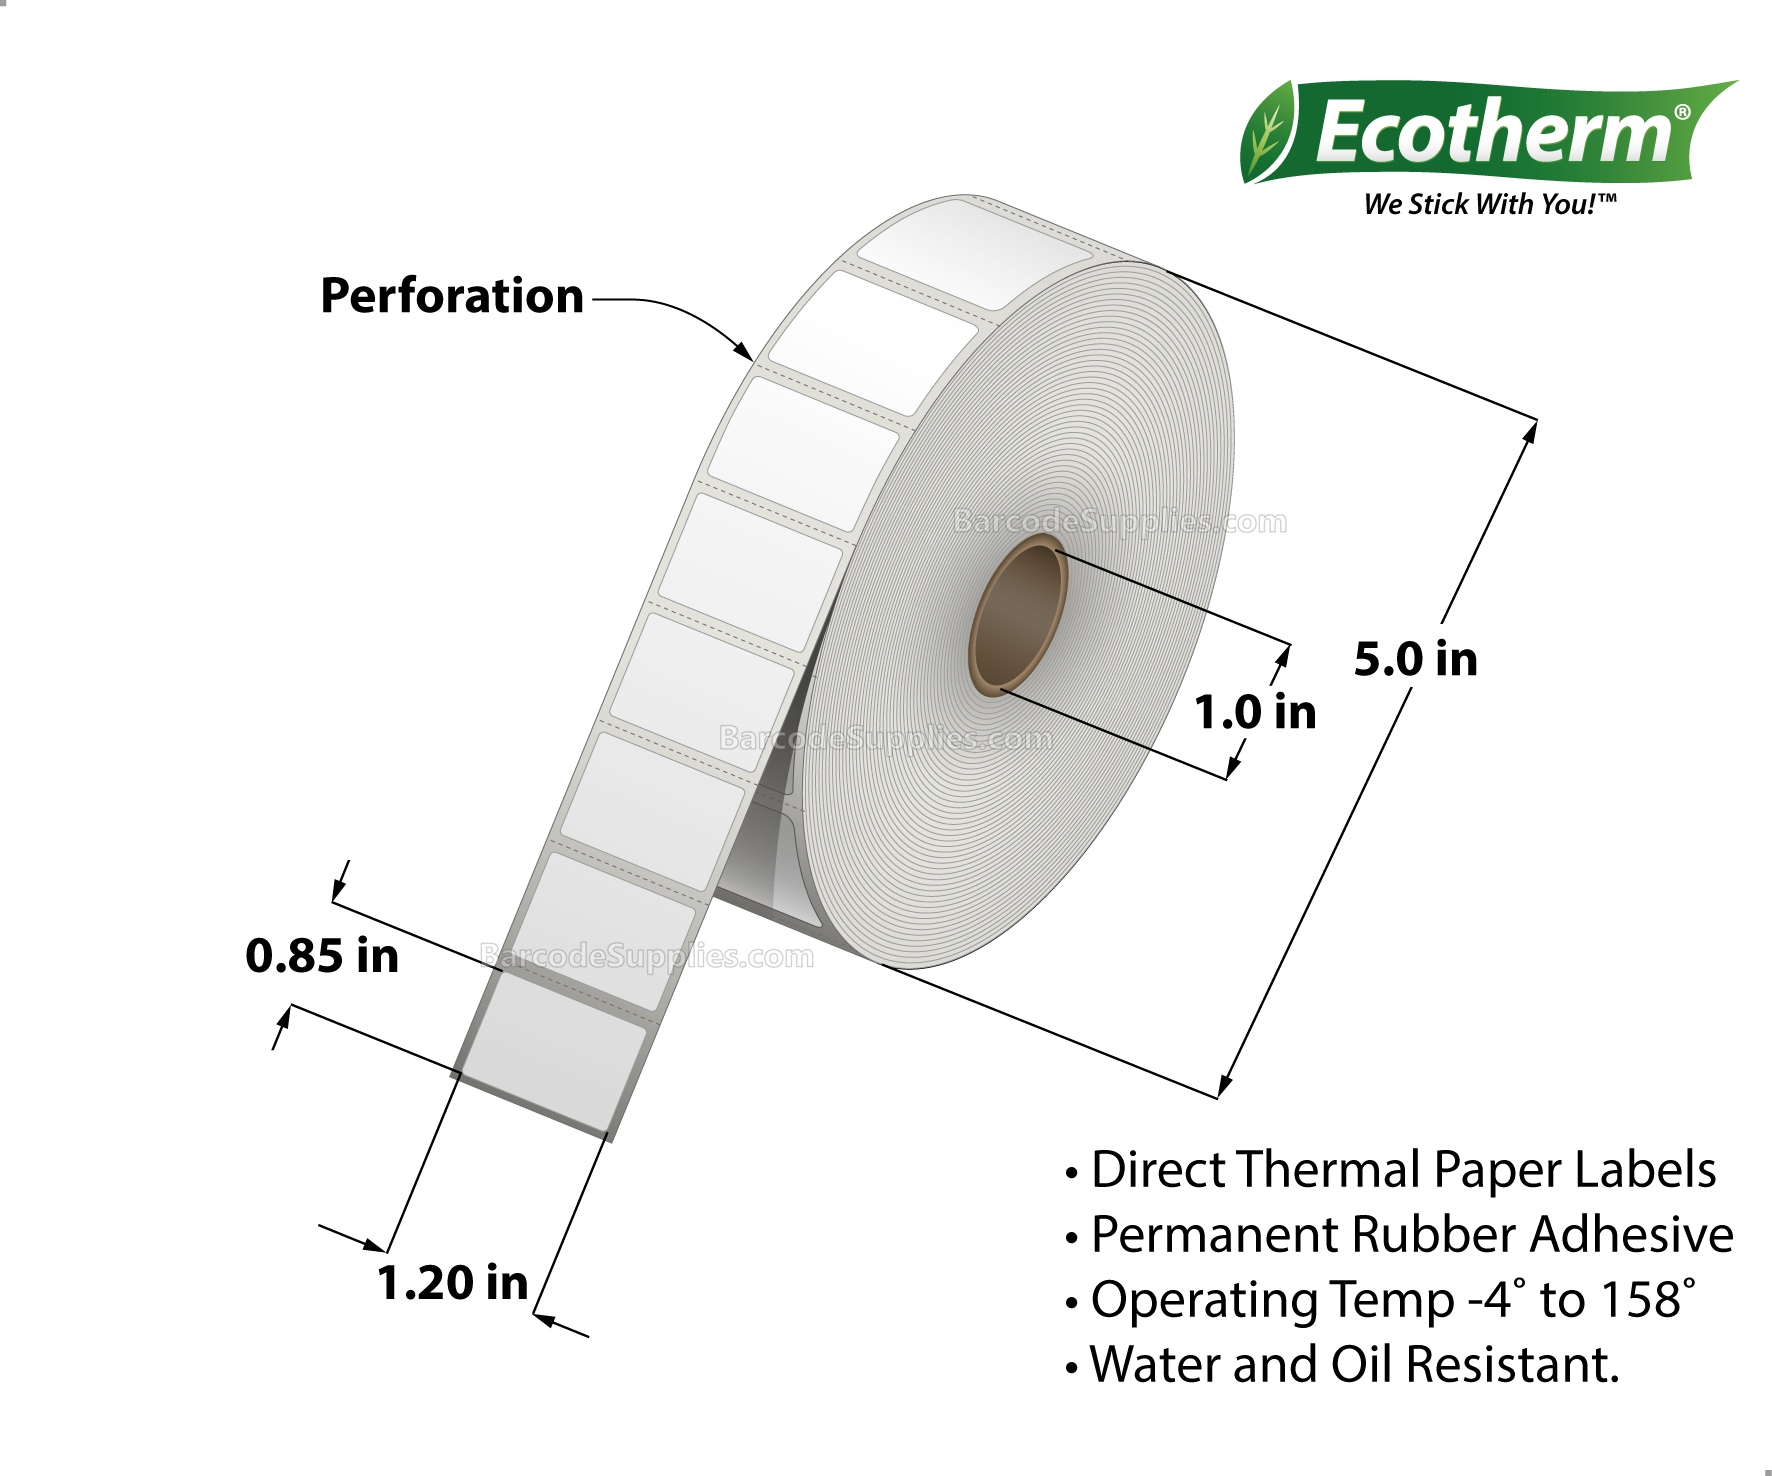 1.2 x 0.85 Direct Thermal White Labels With Rubber Adhesive - Perforated - 2710 Labels Per Roll - Carton Of 6 Rolls - 16260 Labels Total - MPN: ECOTHERM15113-6